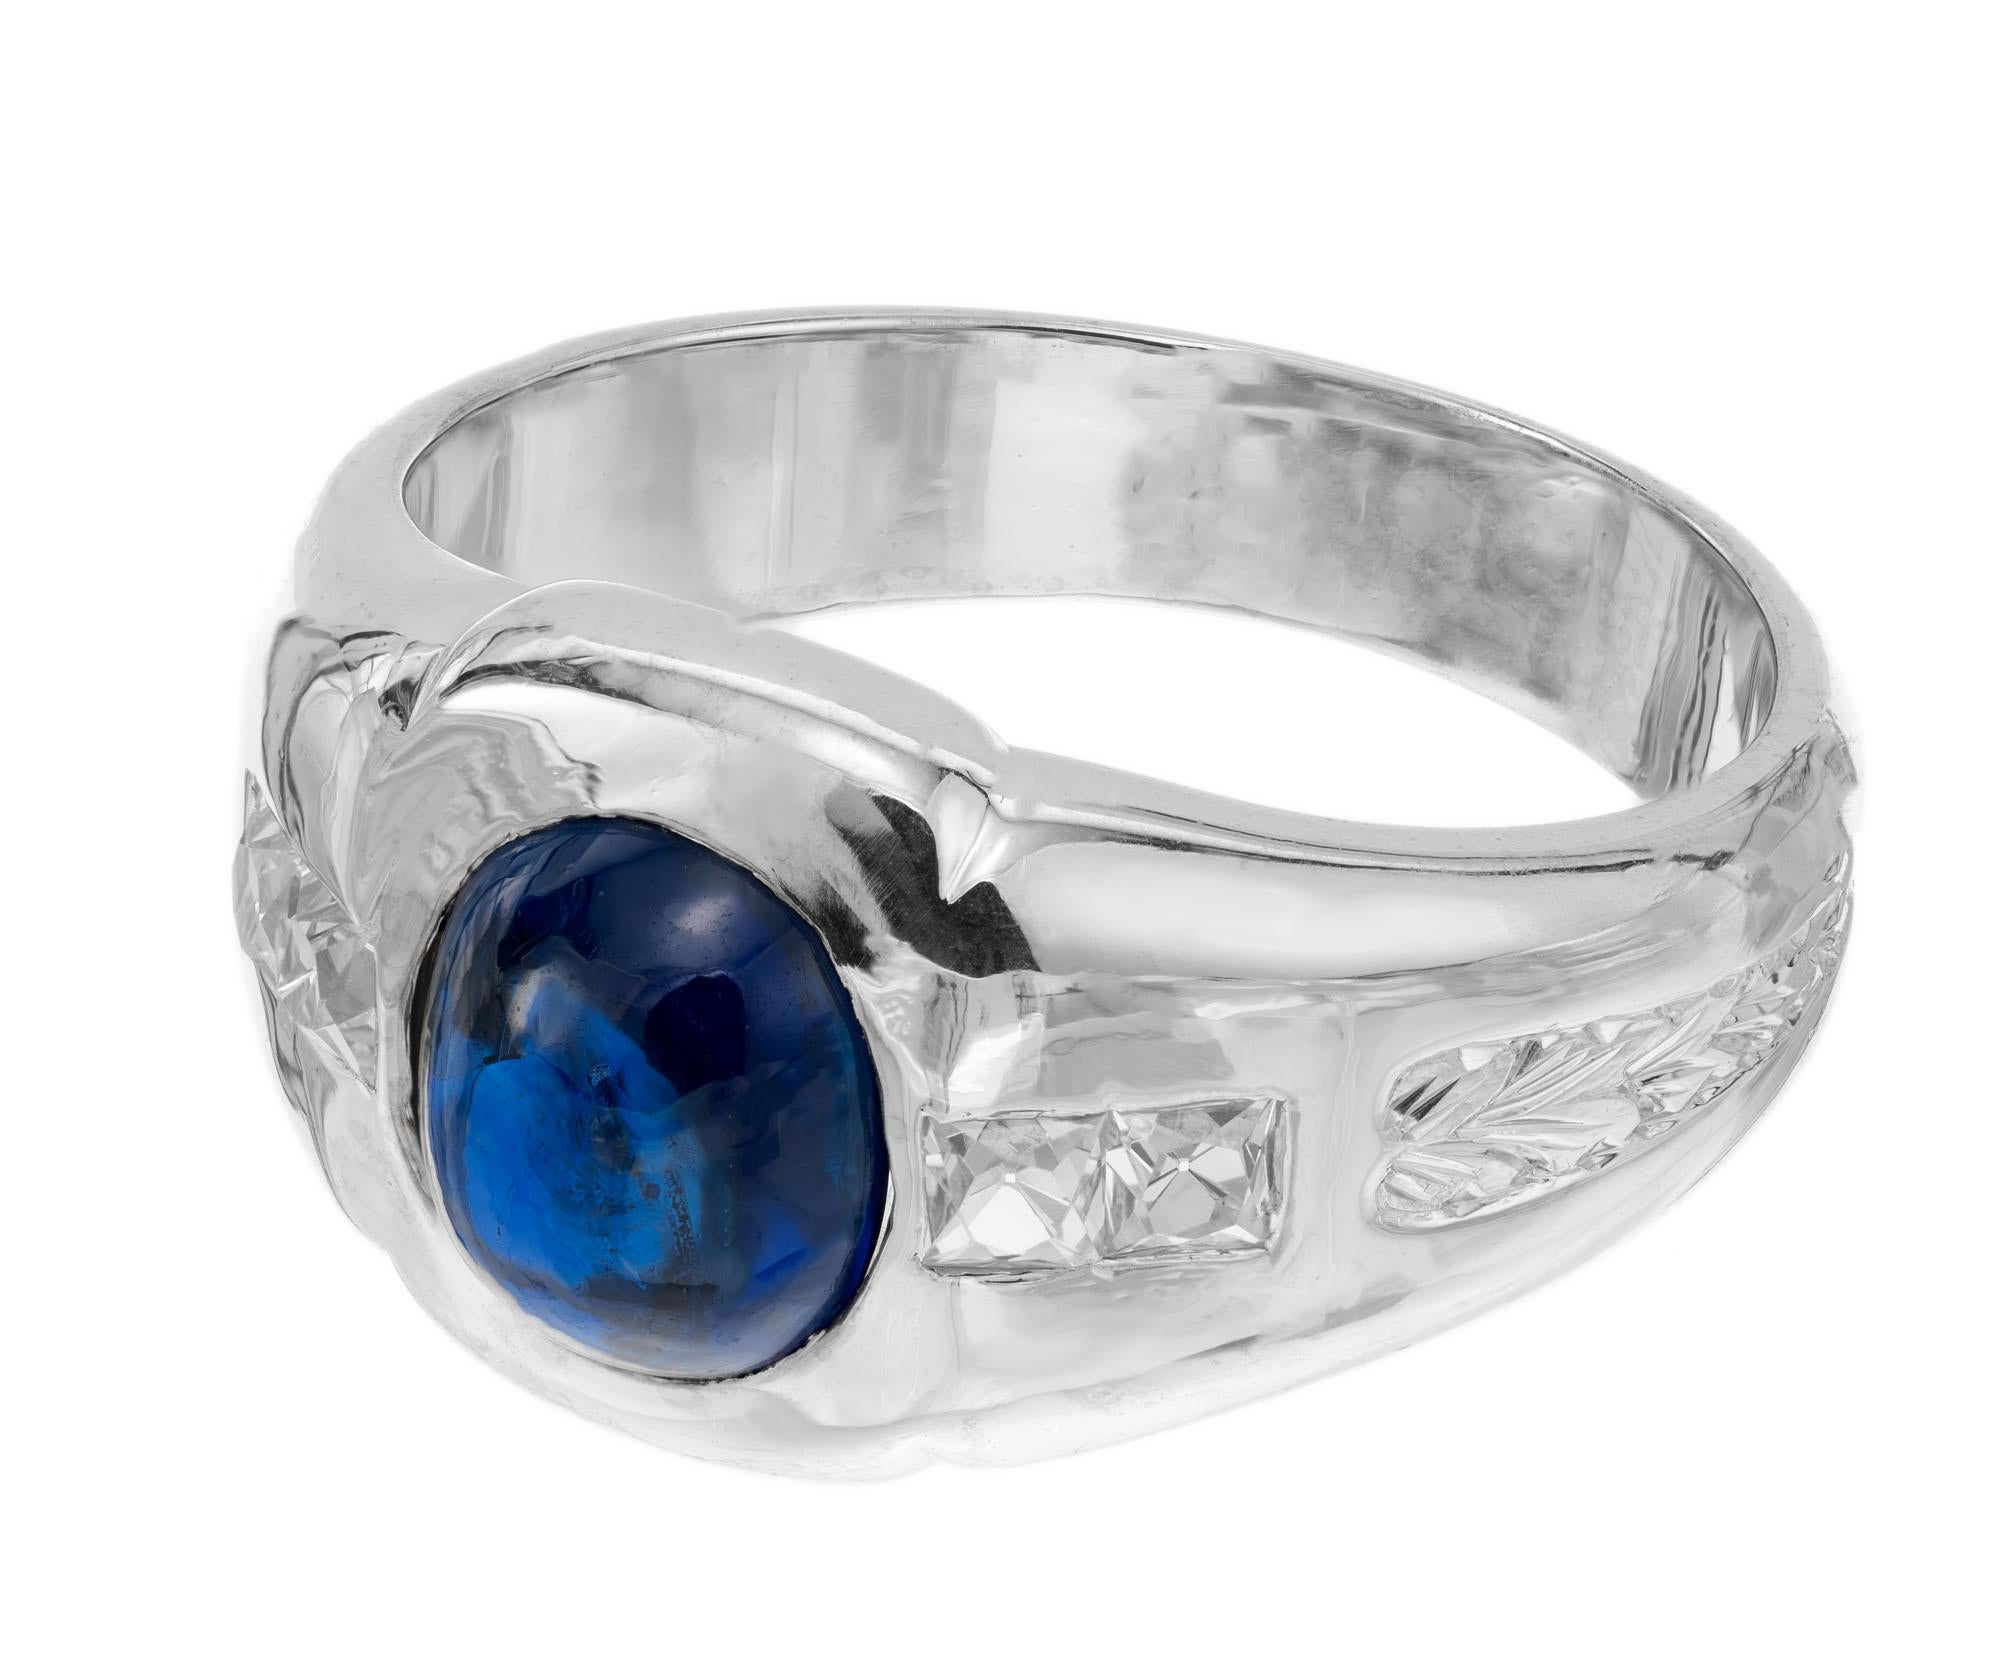 Original Art Deco handmade sapphire and diamond men's ring. AGL certified natural no heat oval cabochon sapphire center stone, accented with 4 French cut diamonds in a platinum setting. Certified by the AGL #GB109006 as natural, no heat Cambodia